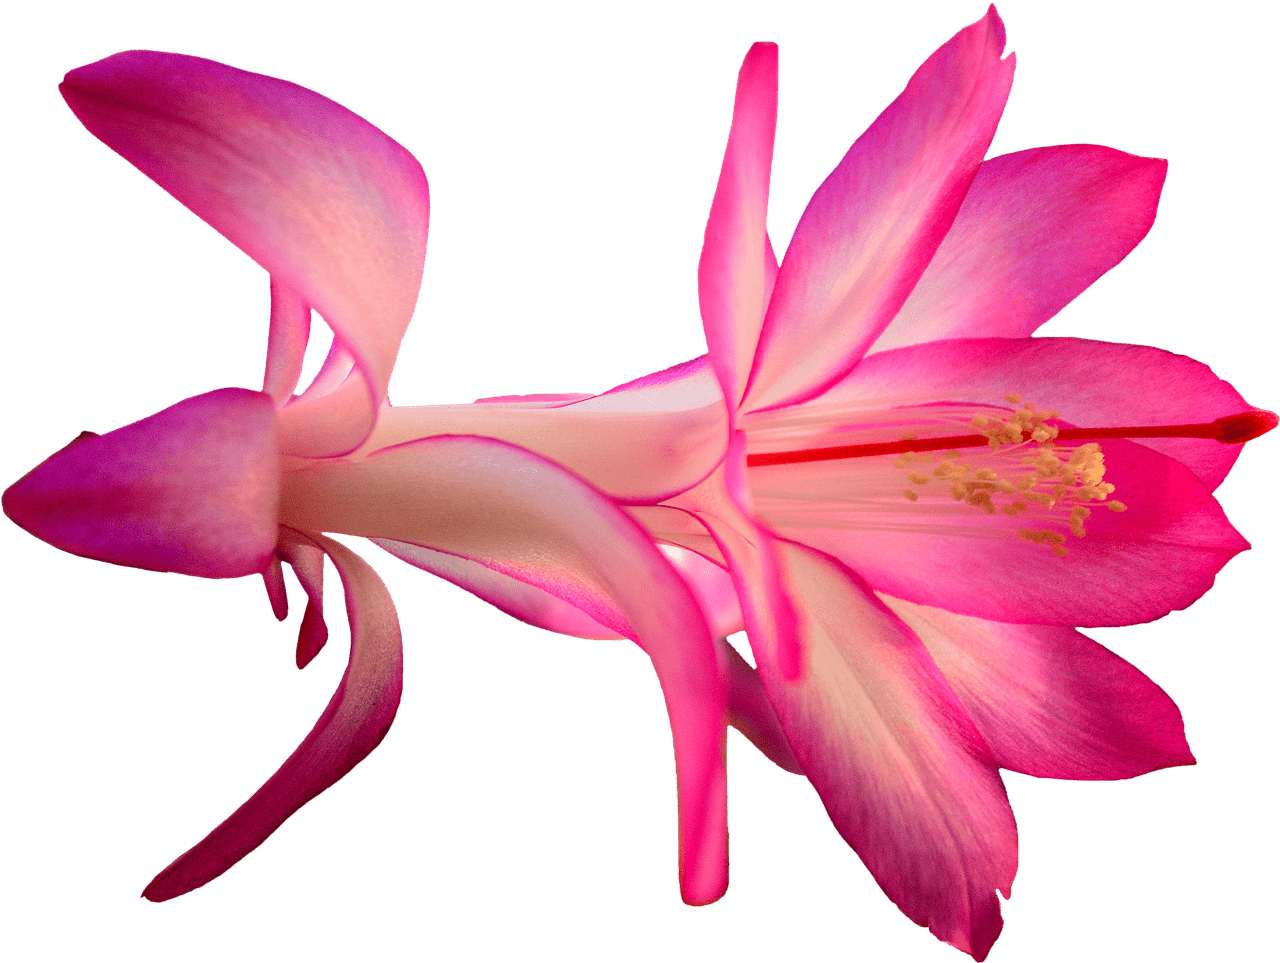 Download - Cactus Flower Png (1280x963)